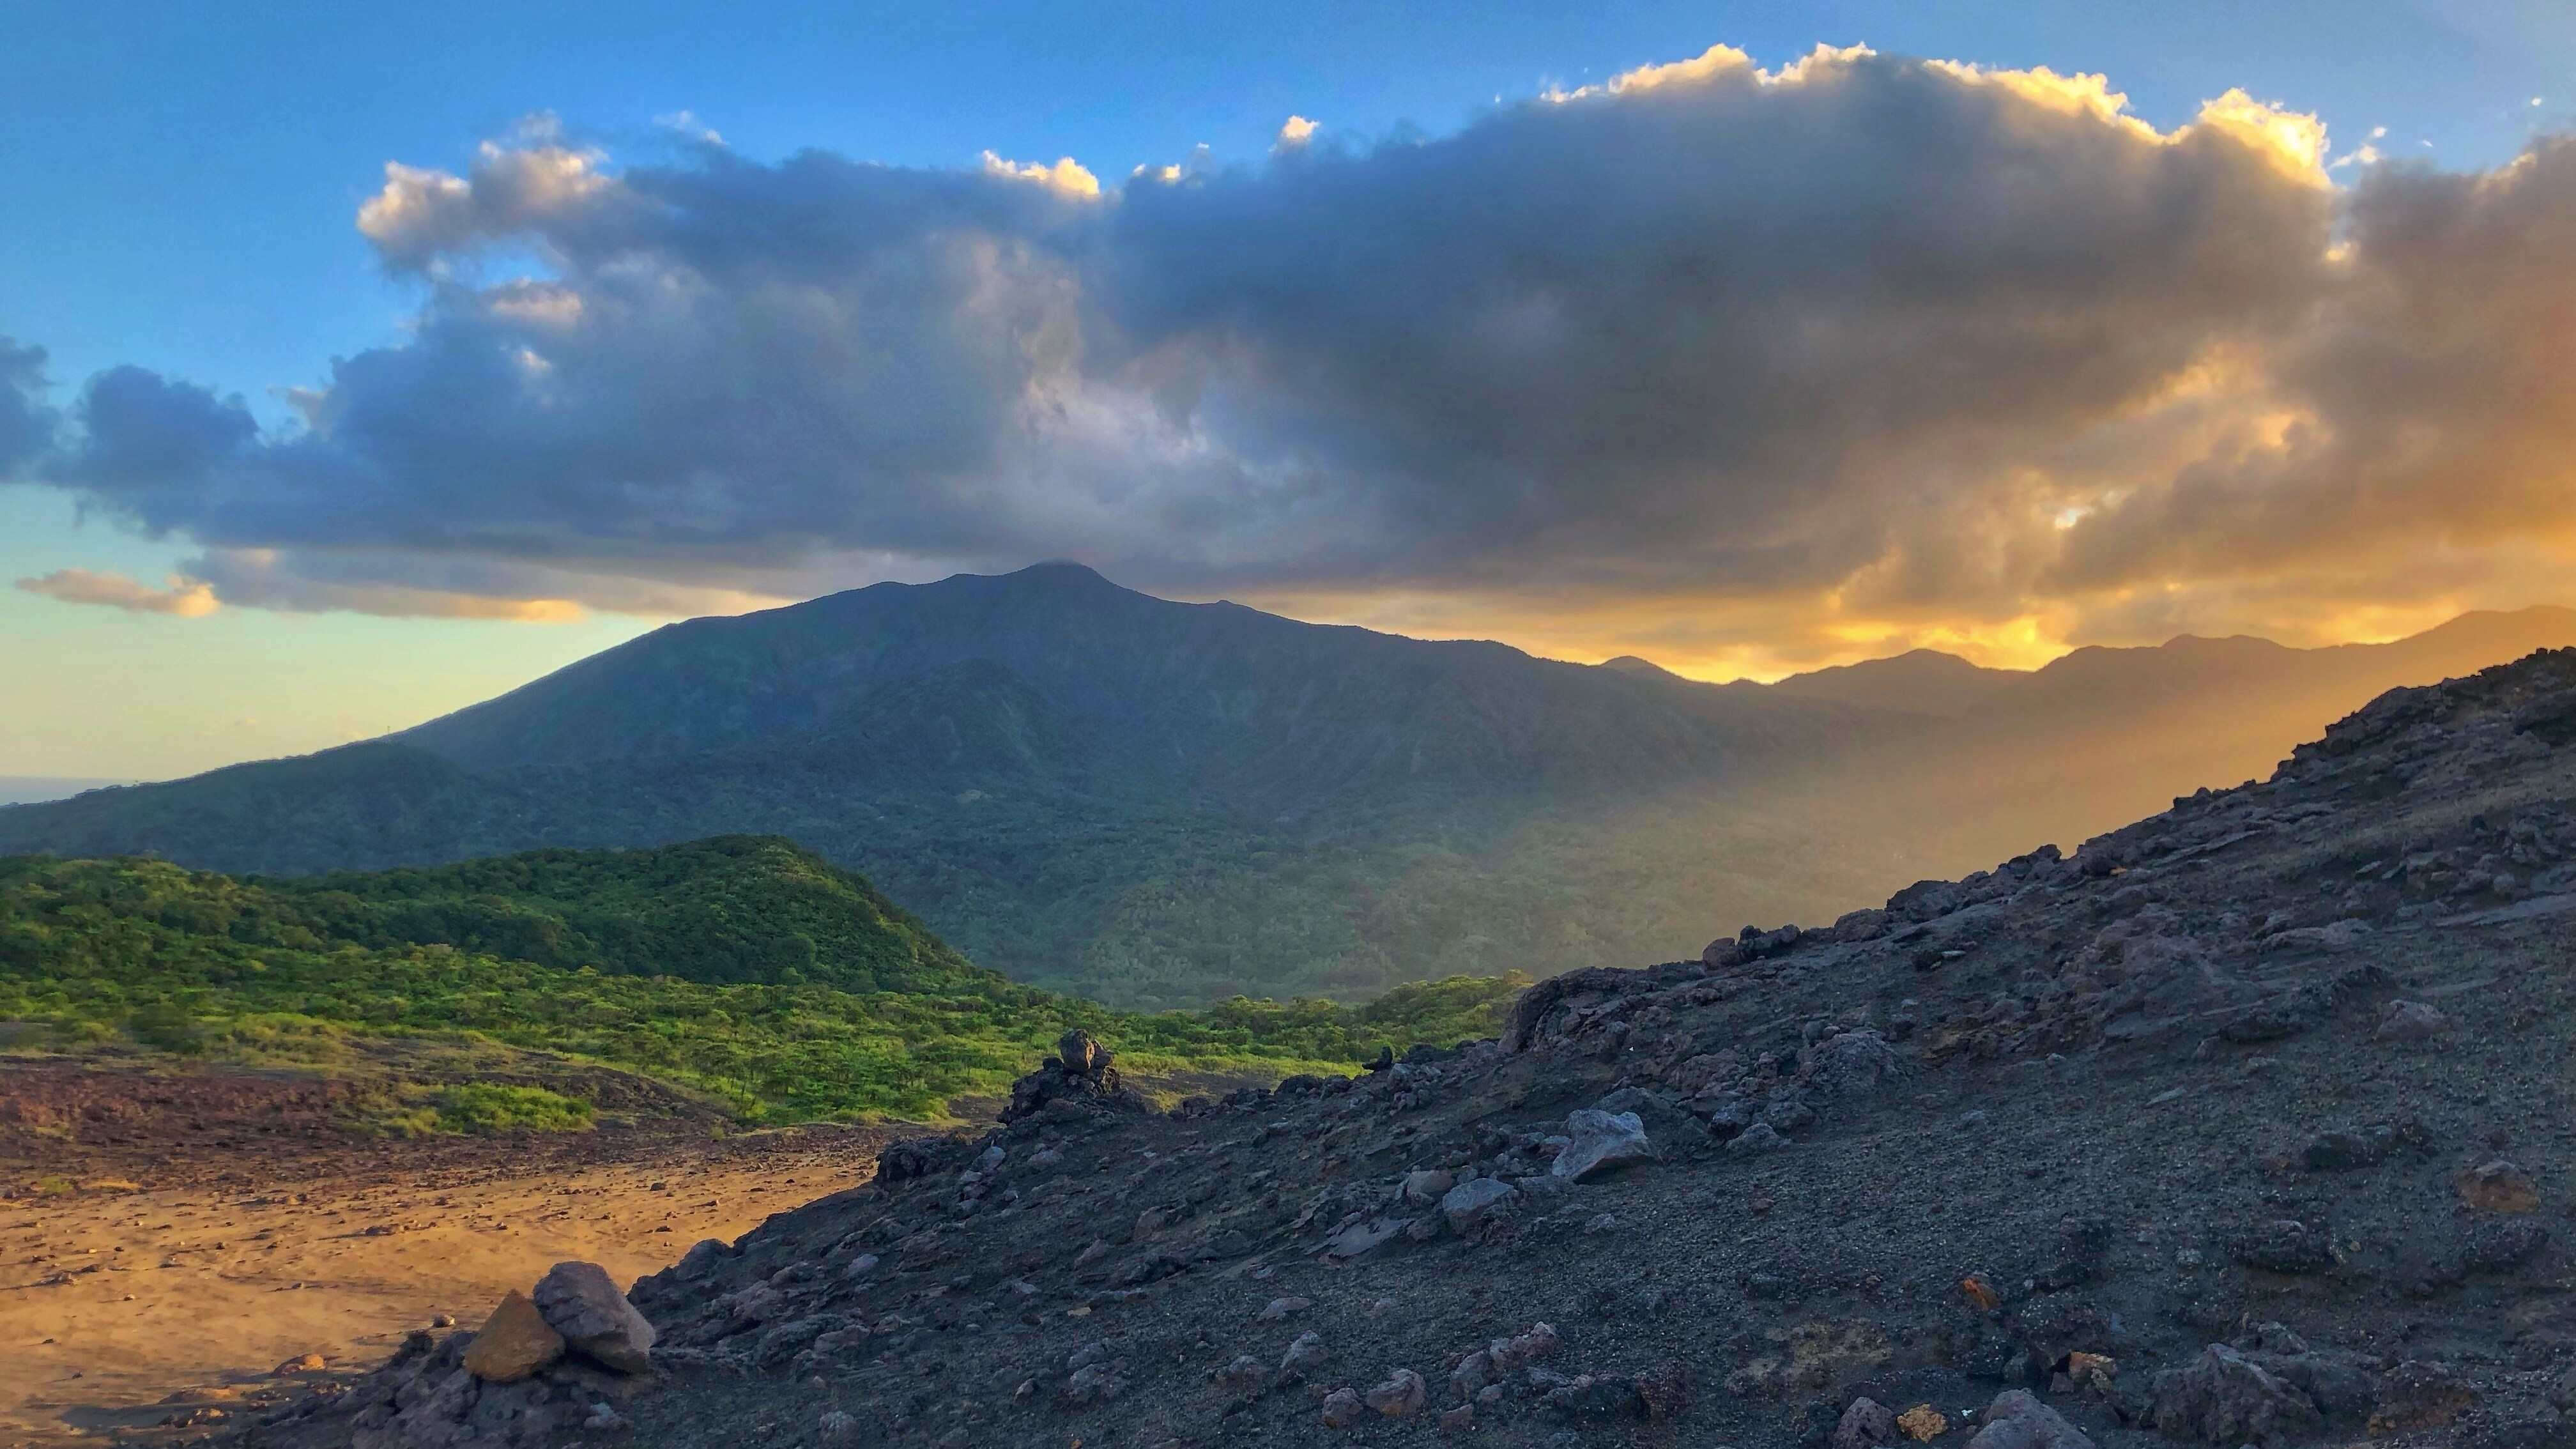 The sun breaks through, shining on the dividing line of life - the nutrient rich ash from the volcano can both take life and also create it. (photo credit:National Geographic for Disney+/Brendan McGinty)